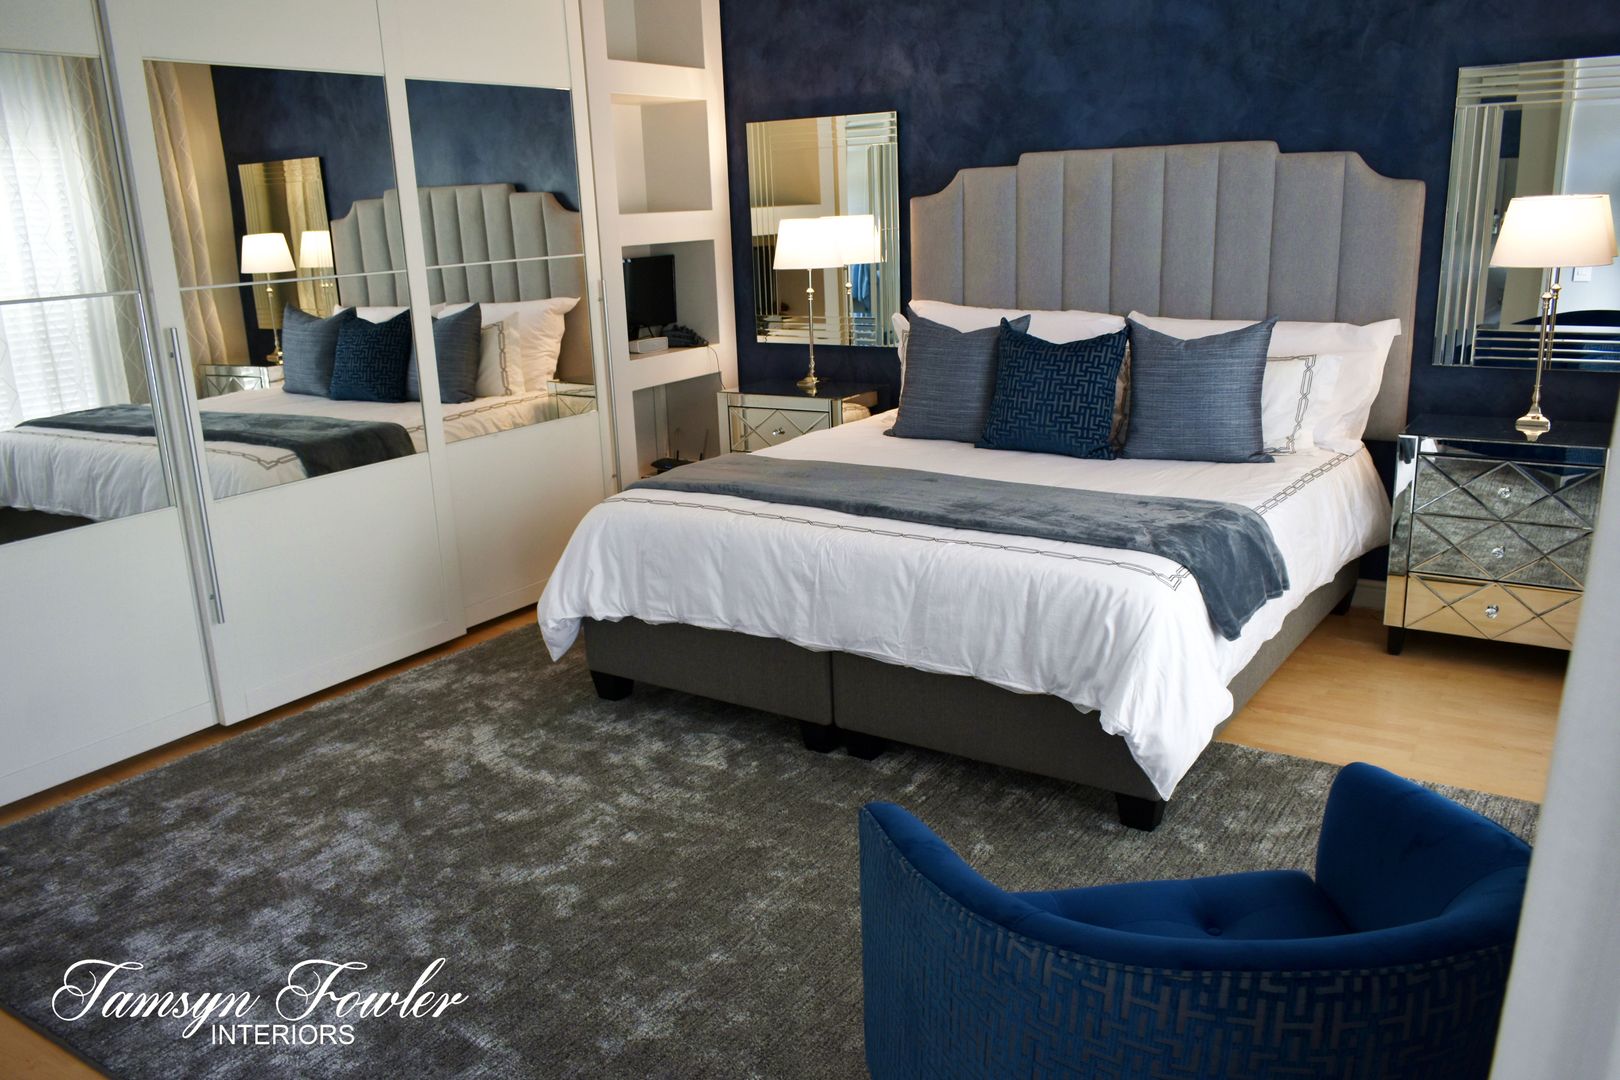 Moody in blue, Tamsyn Fowler Interiors Tamsyn Fowler Interiors Modern style bedroom